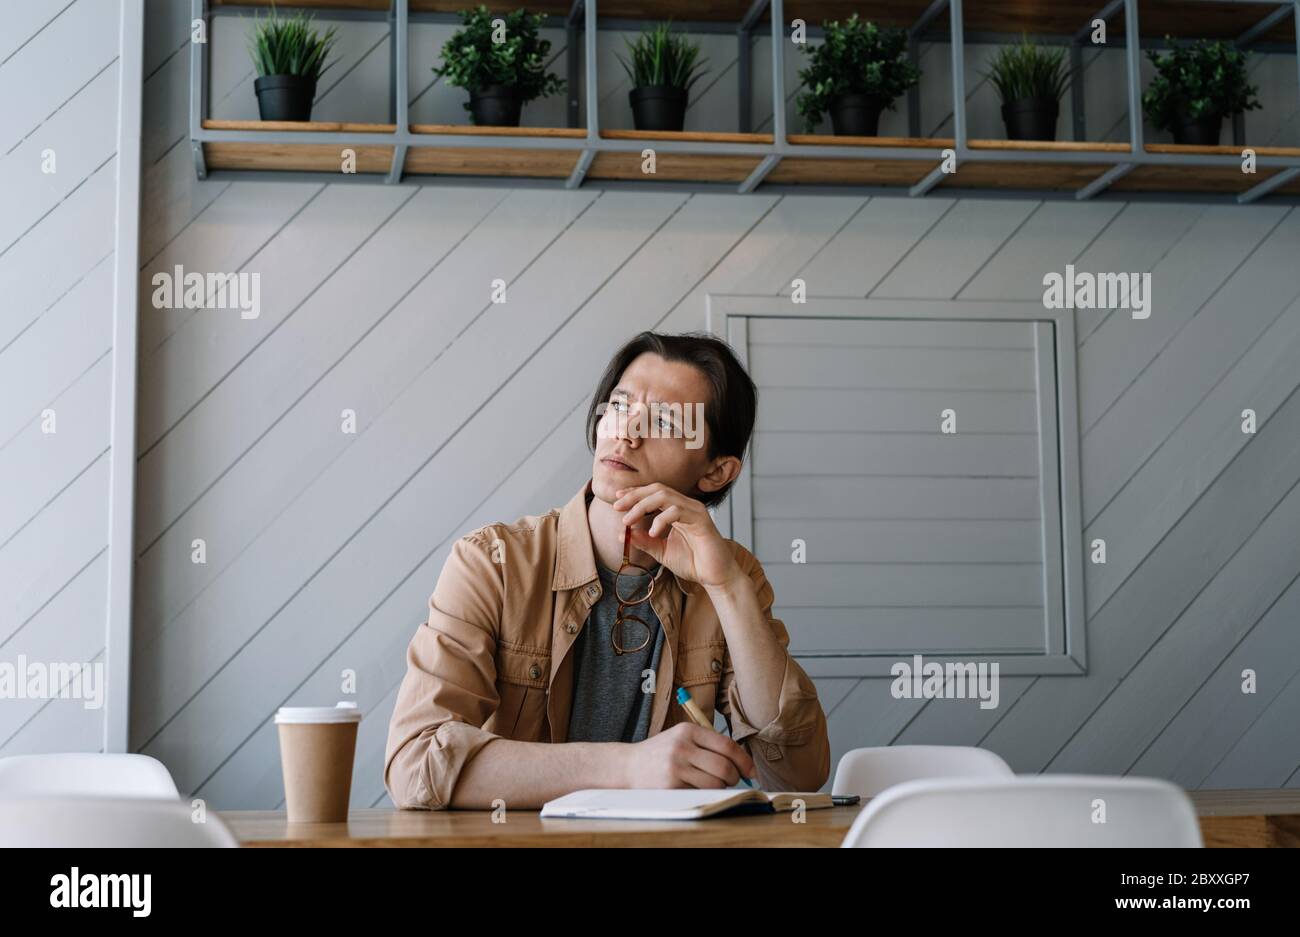 Serious man working freelance project, writing notes, thinking, brainstorming at workplace. Portrait of pensive student studying, learning language Stock Photo